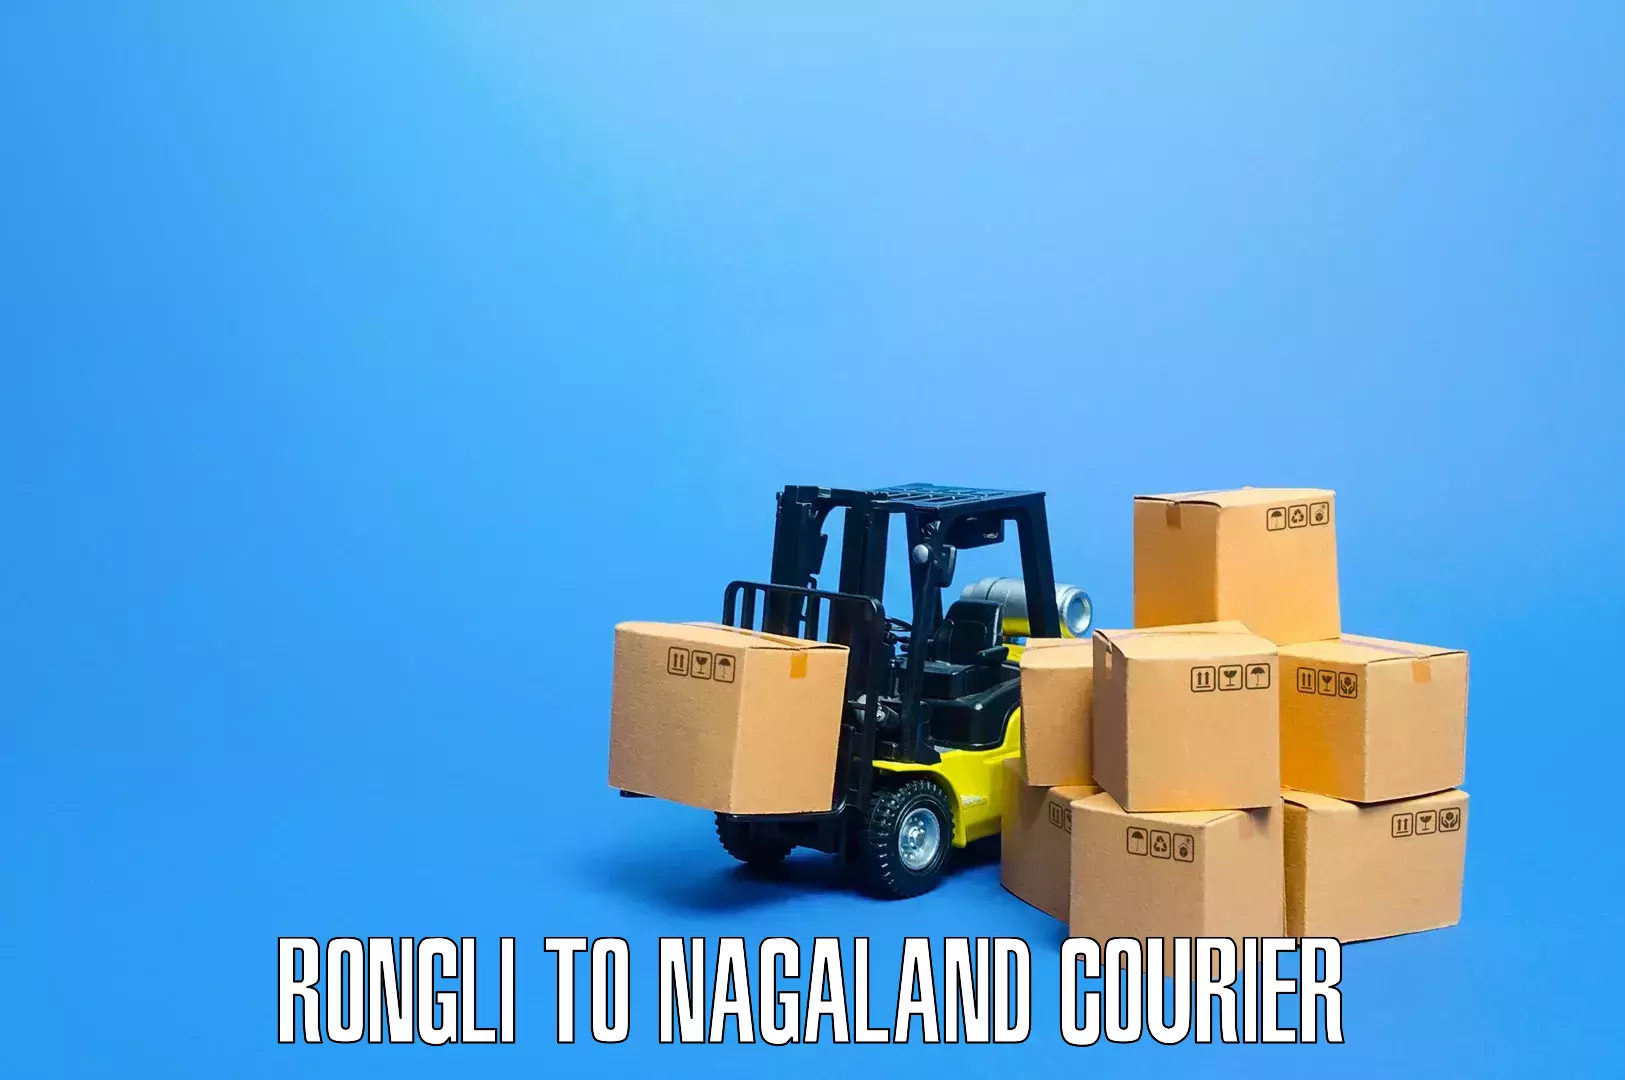 Hassle-free relocation Rongli to Nagaland